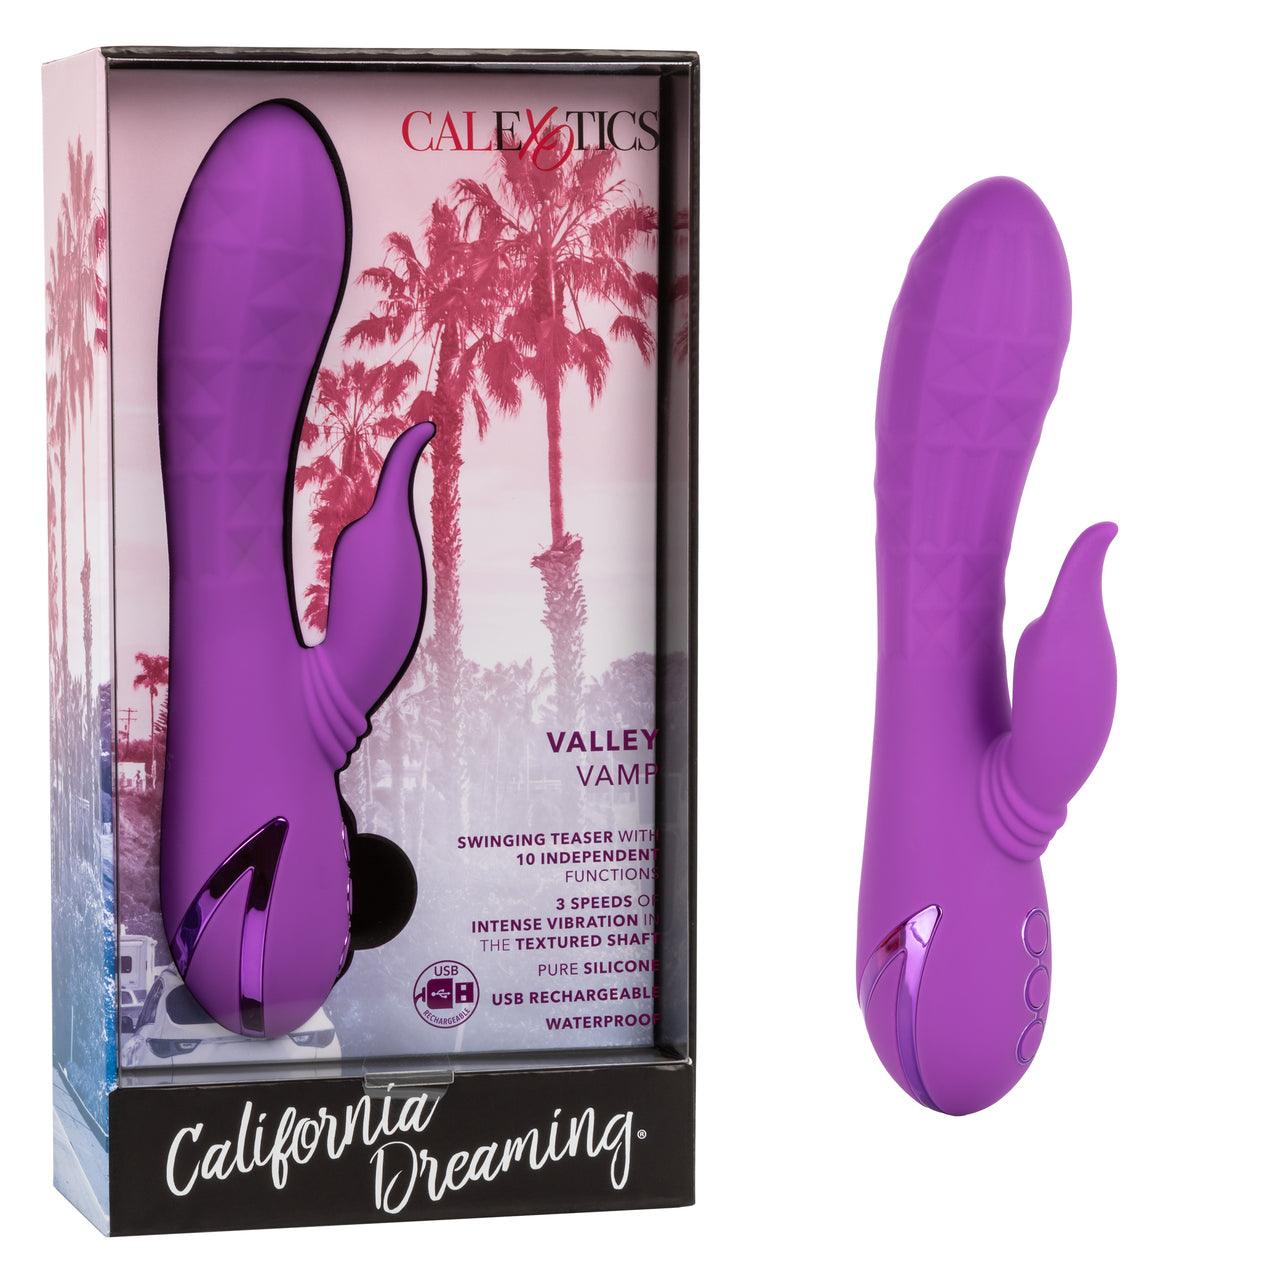 Calextoics California Dreaming Valley Vamp - Buy At Luxury Toy X - Free 3-Day Shipping